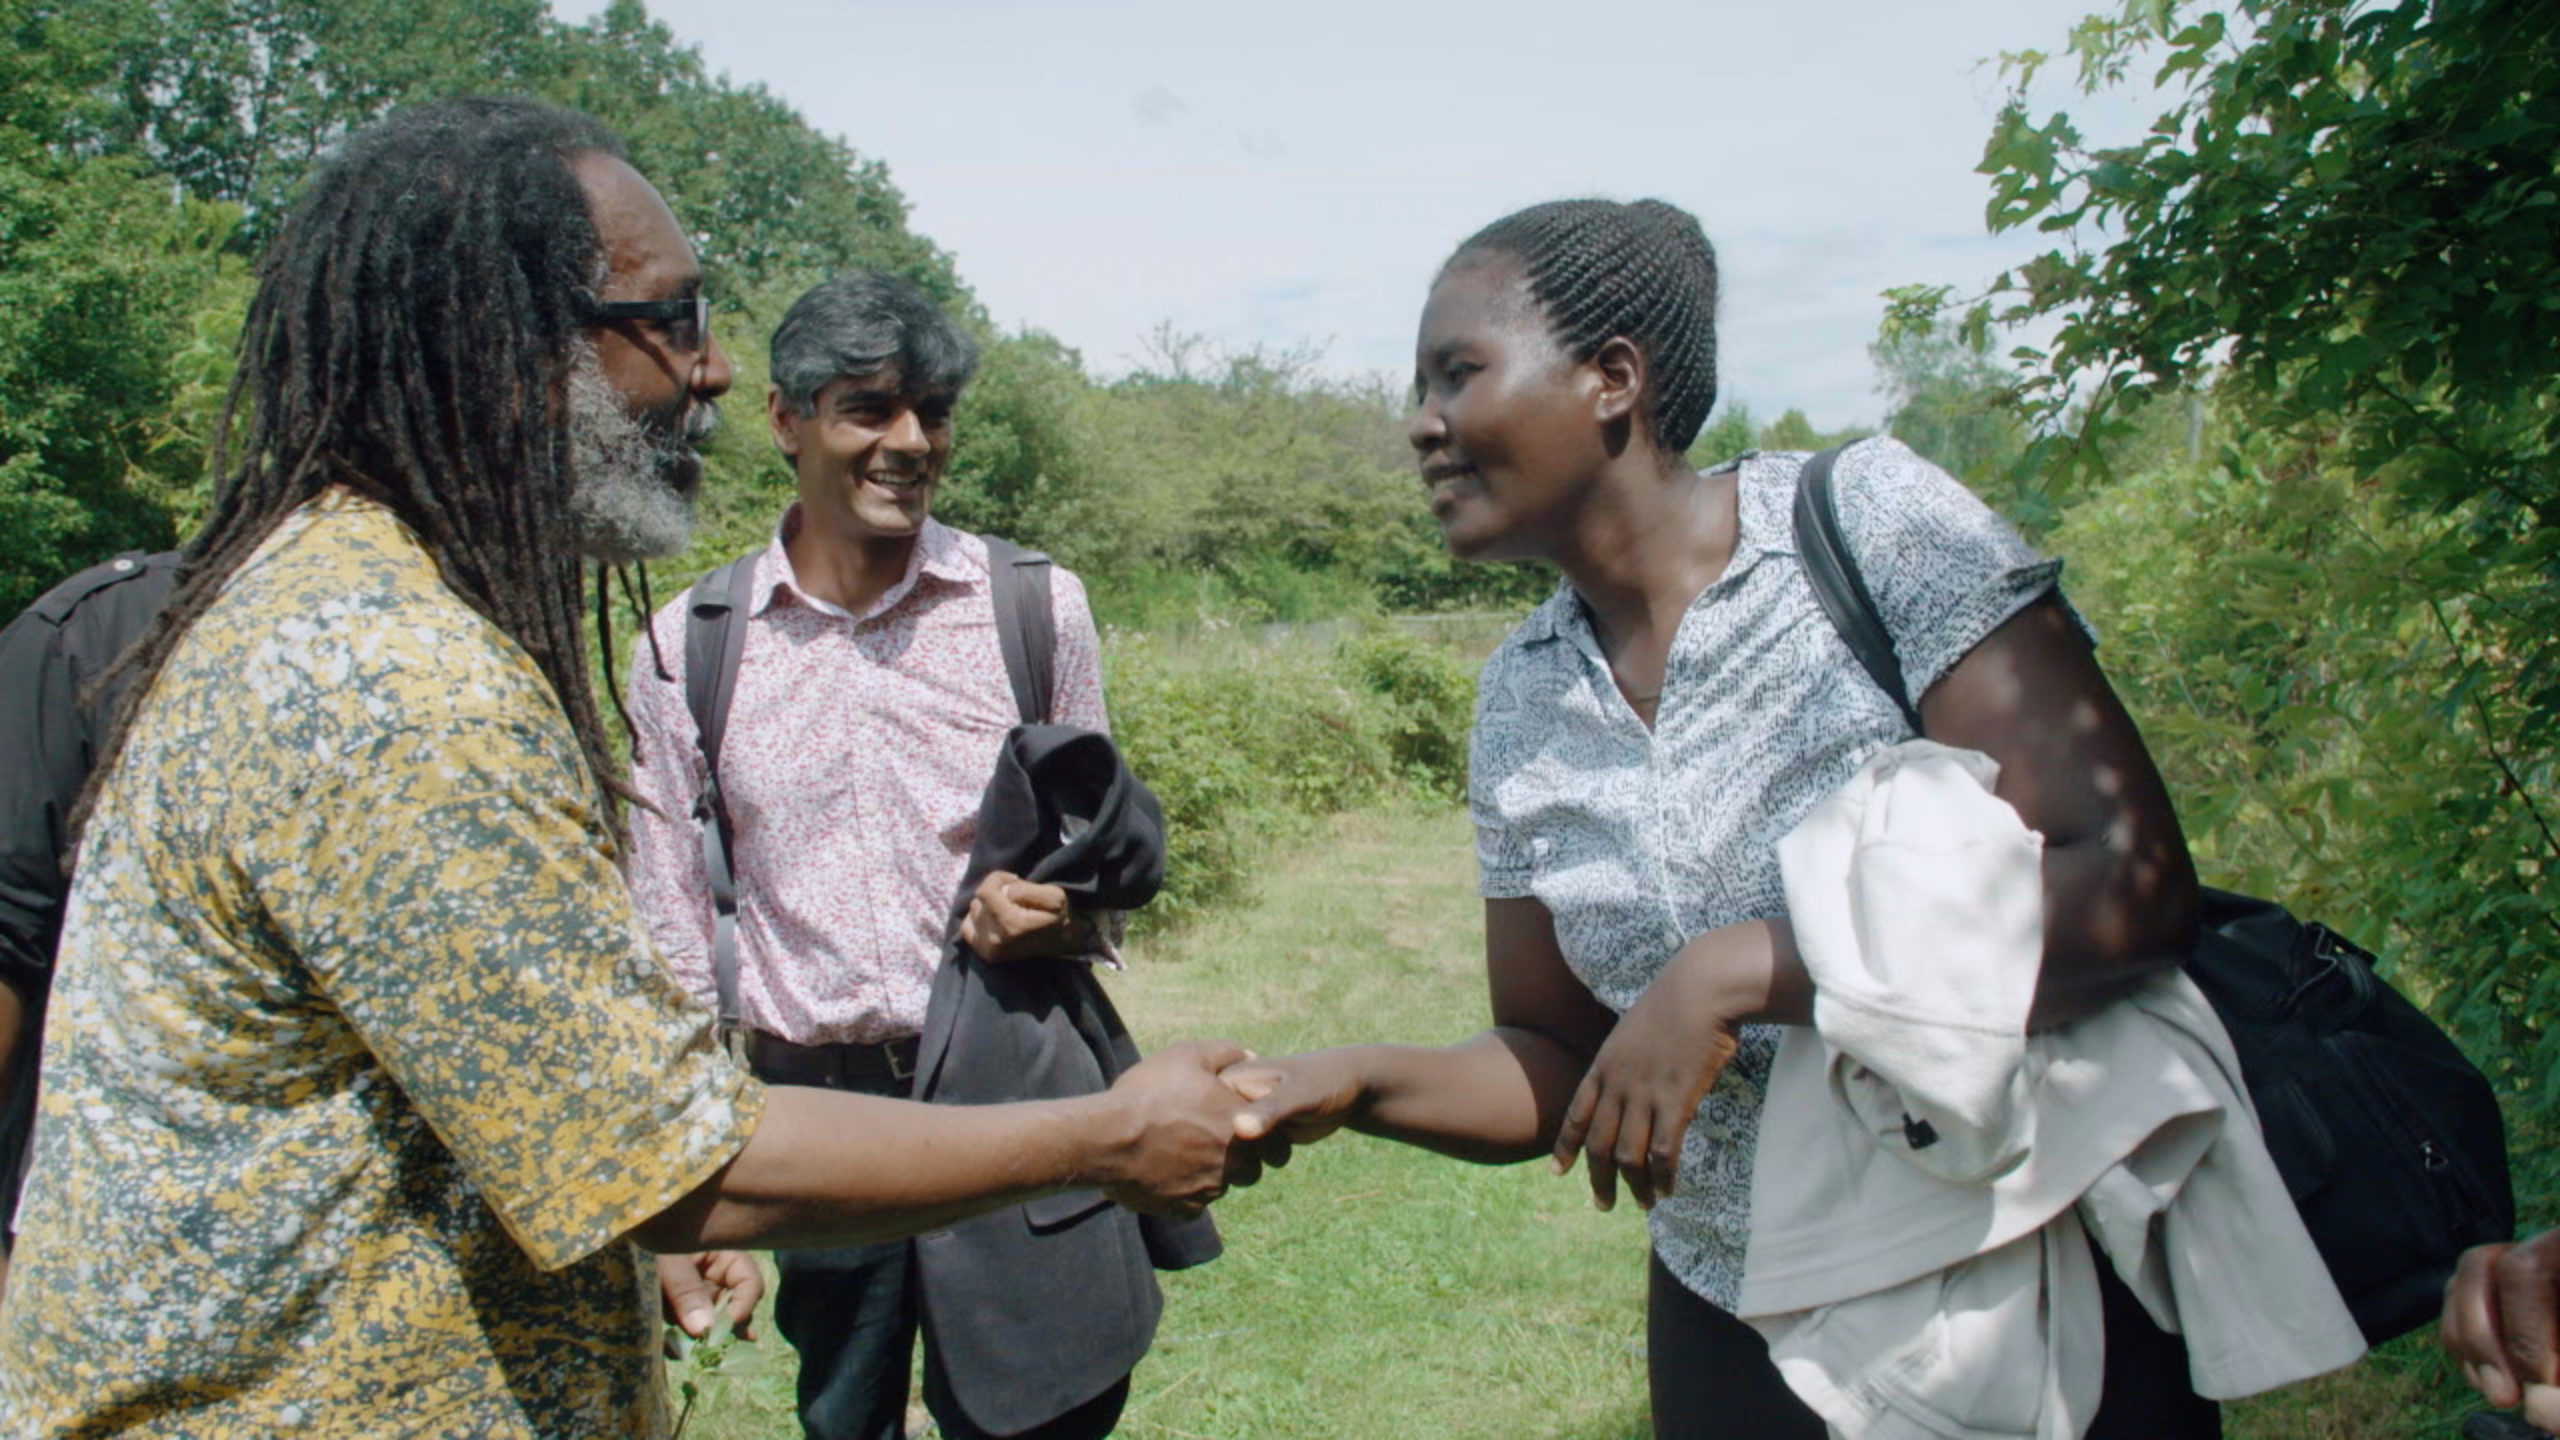 A man and woman shake hands in a lush African landscape while another man looks on smiling